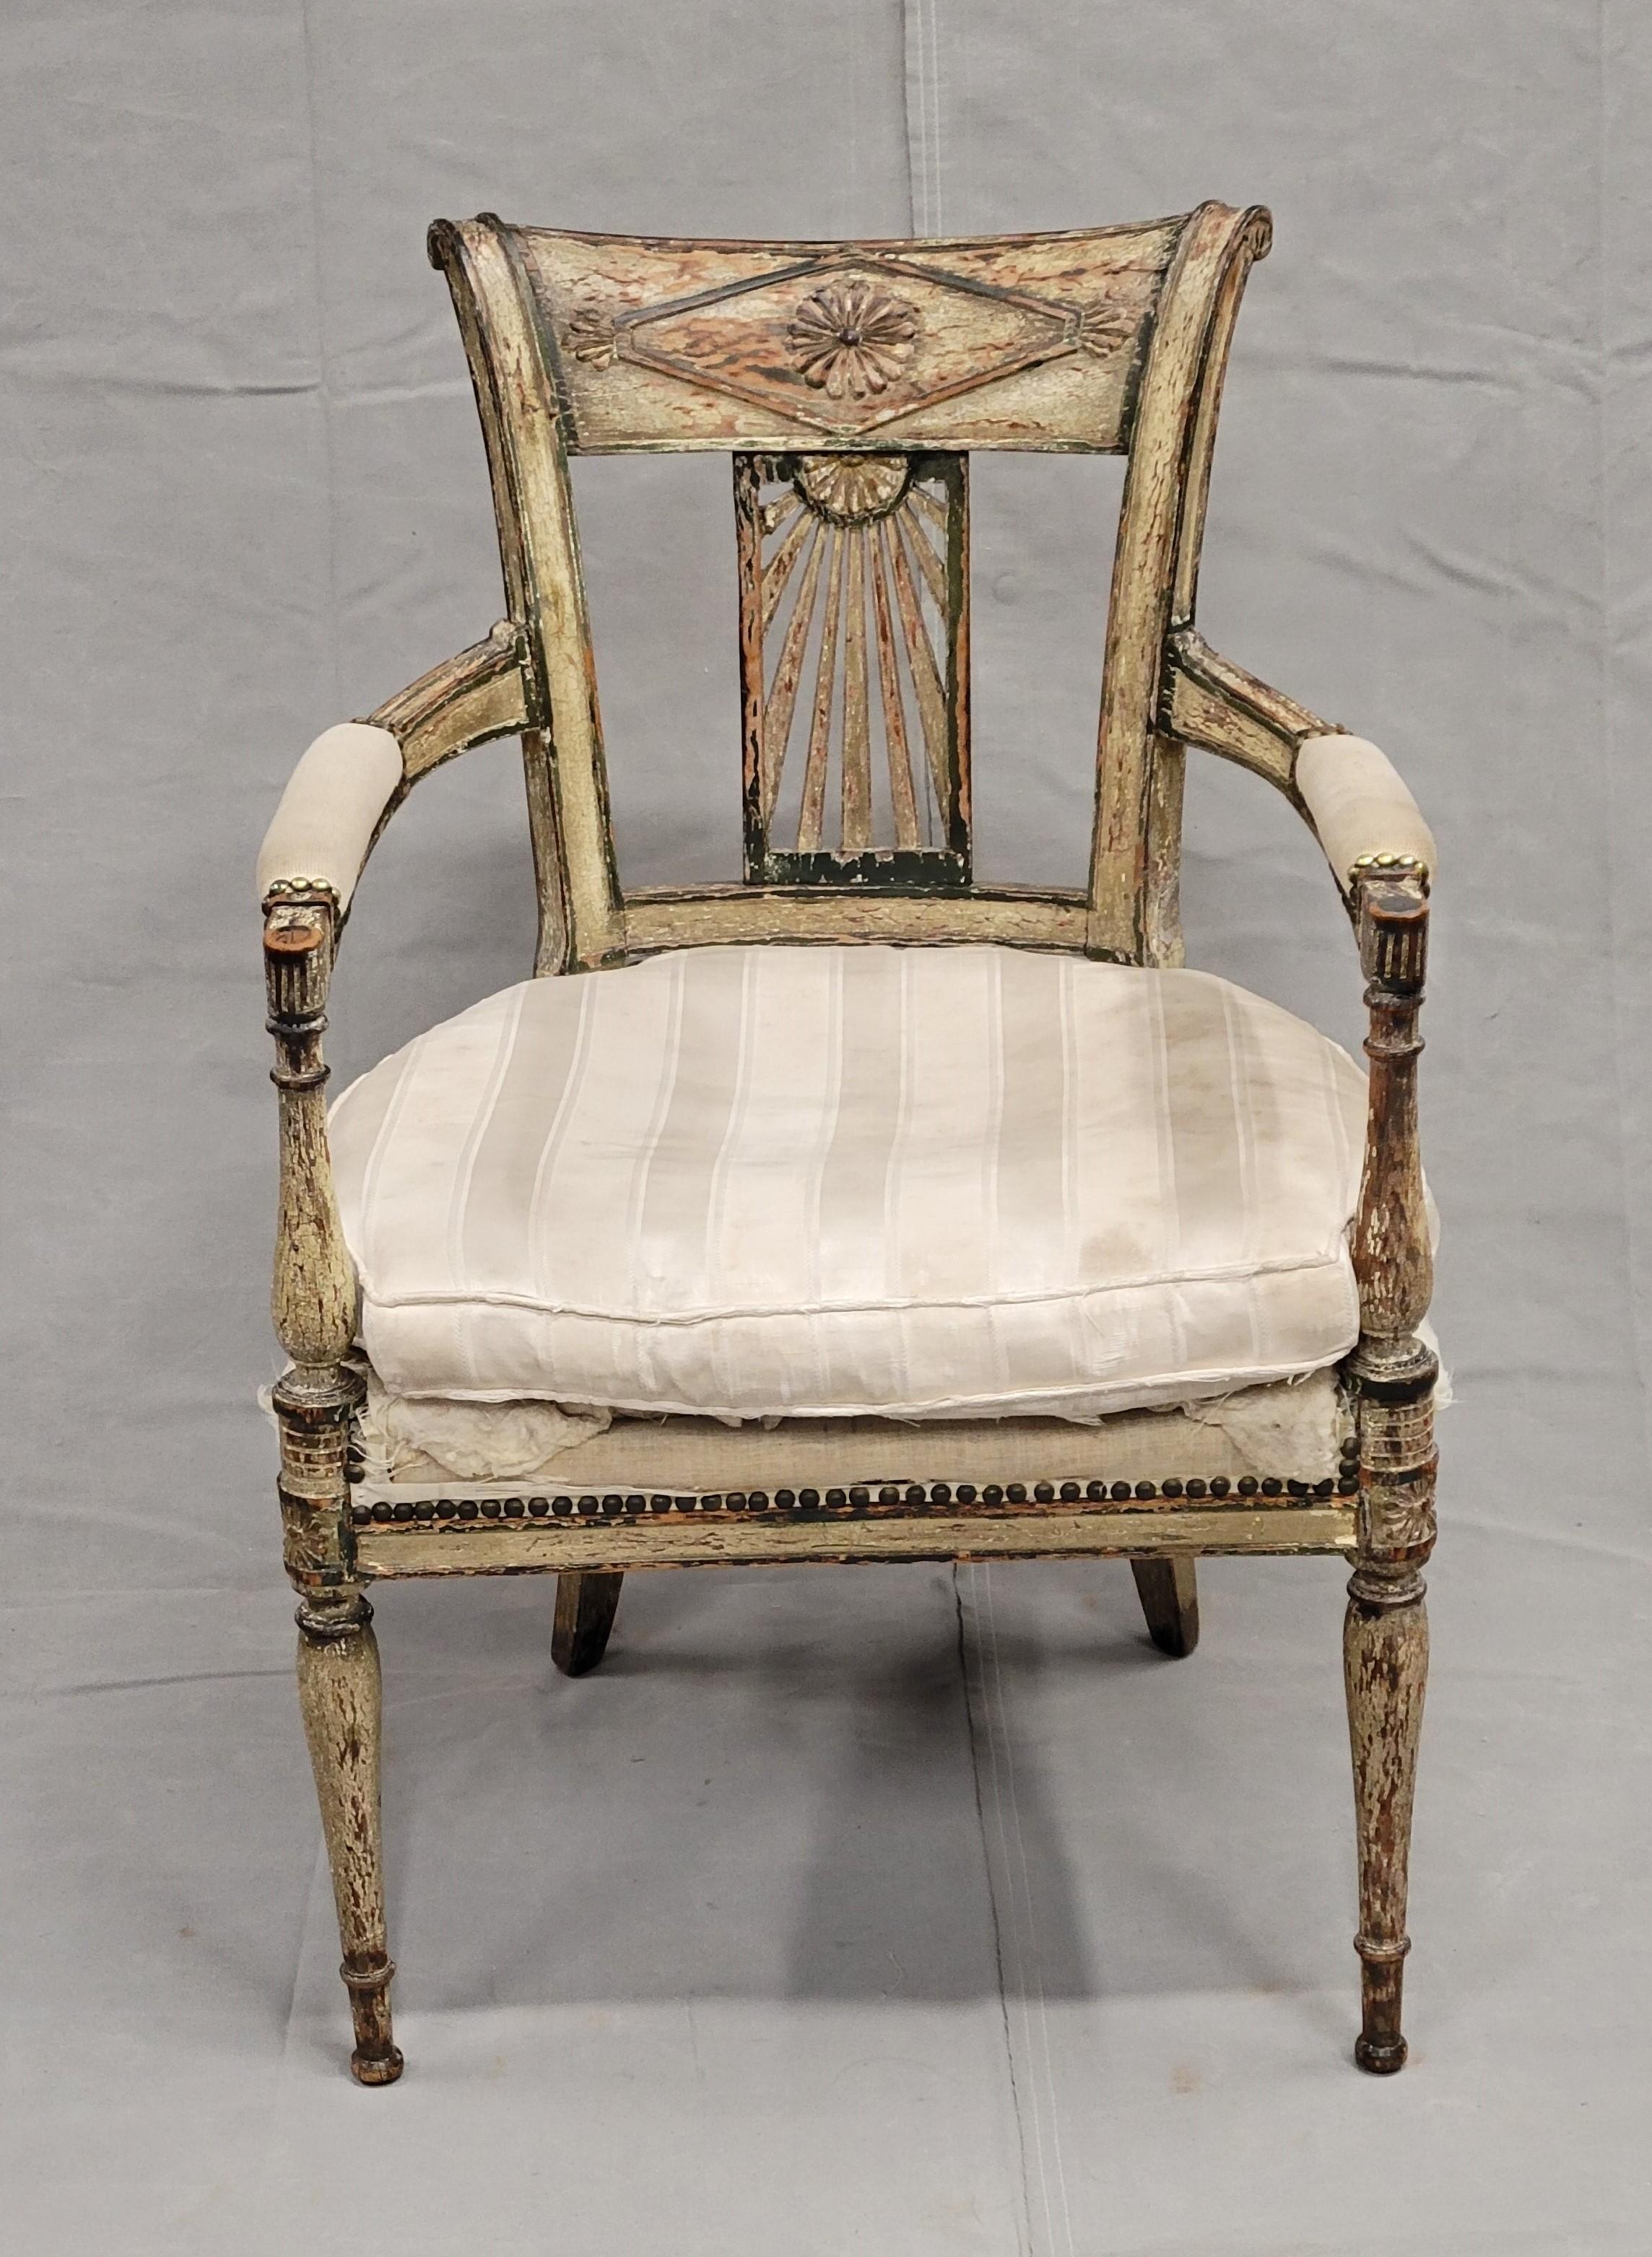 Antique Maison Jansen Style French Louis XVI Painted Fauteuil Chairs - a Pair For Sale 2